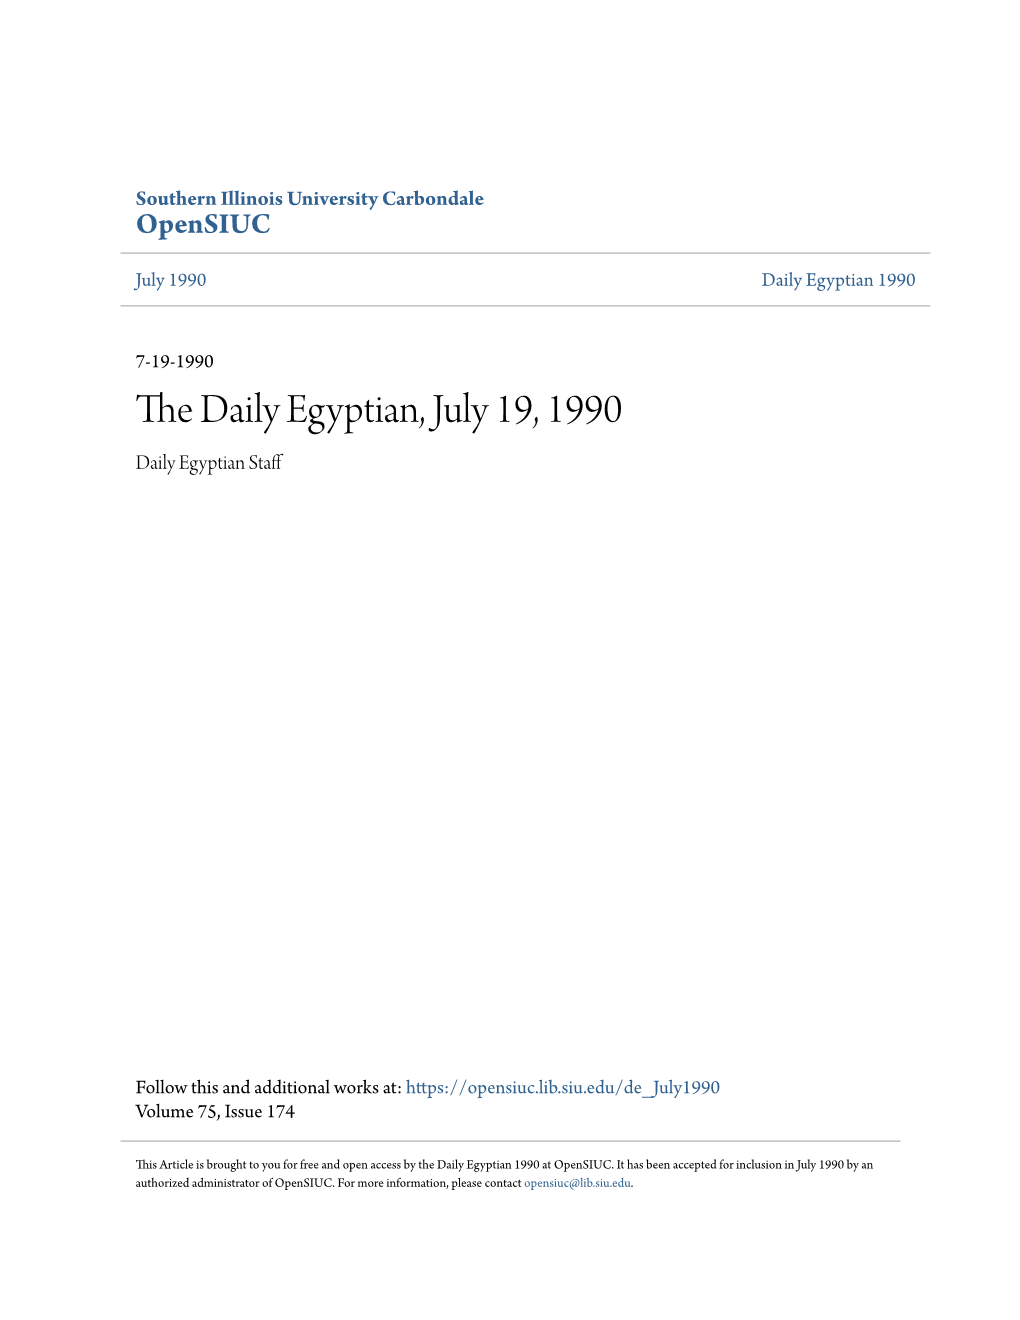 The Daily Egyptian, July 19, 1990